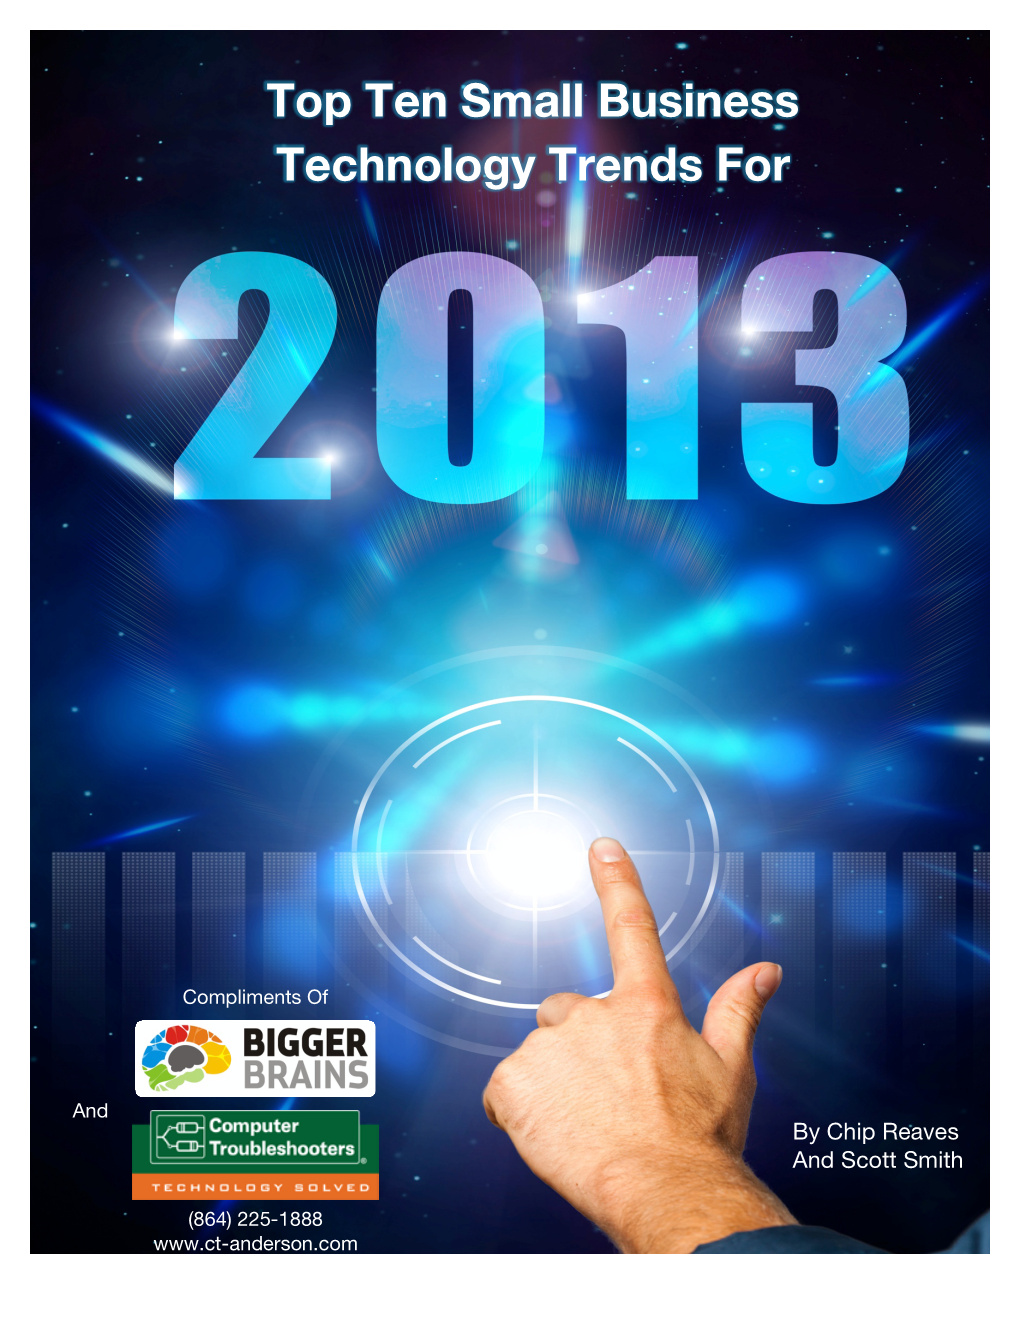 Top Ten Small Business Technology Trends For